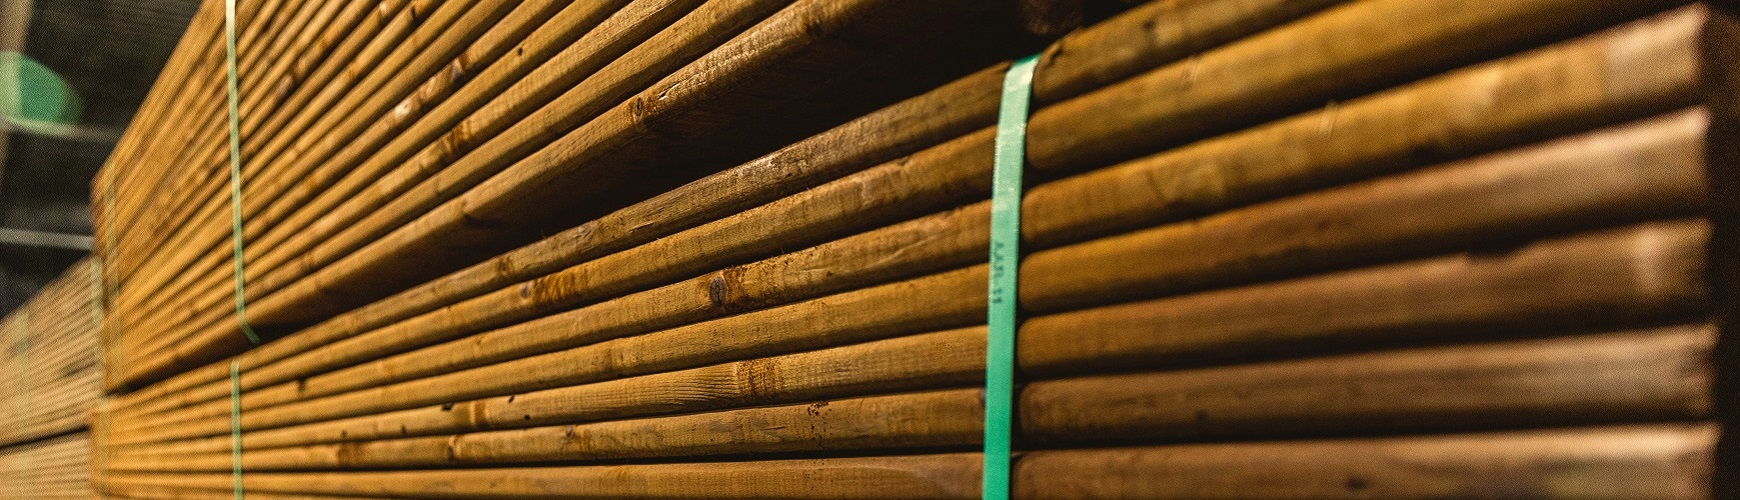 Treated lumber and accessories - Groupe Lebel inc.